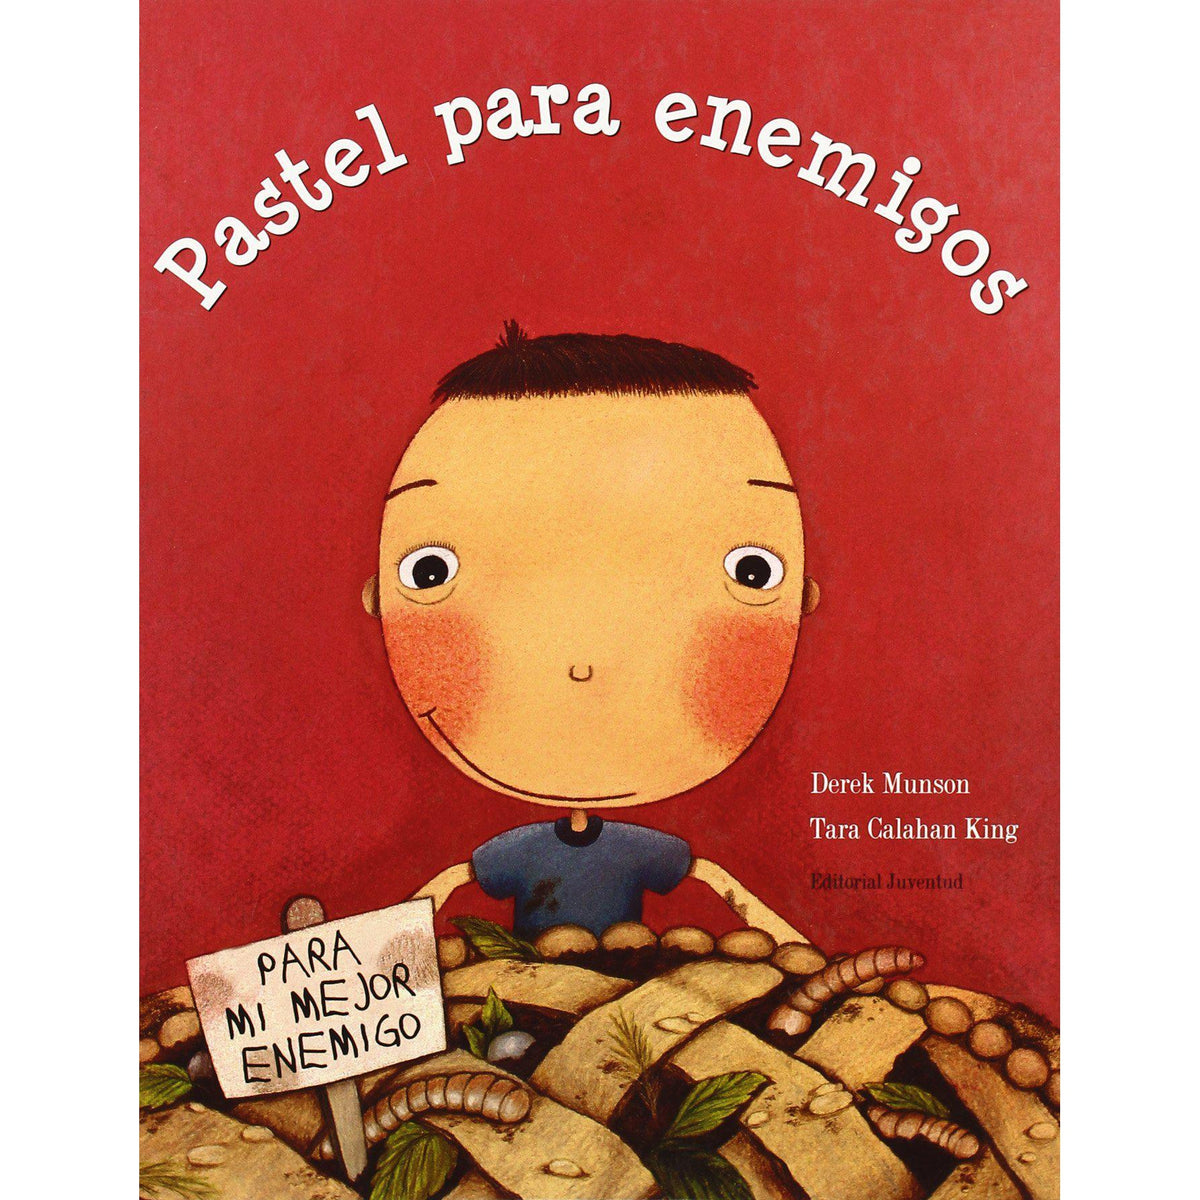 Pastel Para Eemigos [Enemy Pie] | Munson &amp; King - Spanish Edition-The Arts-Chronicle | Hachette-Yellow Springs Toy Company